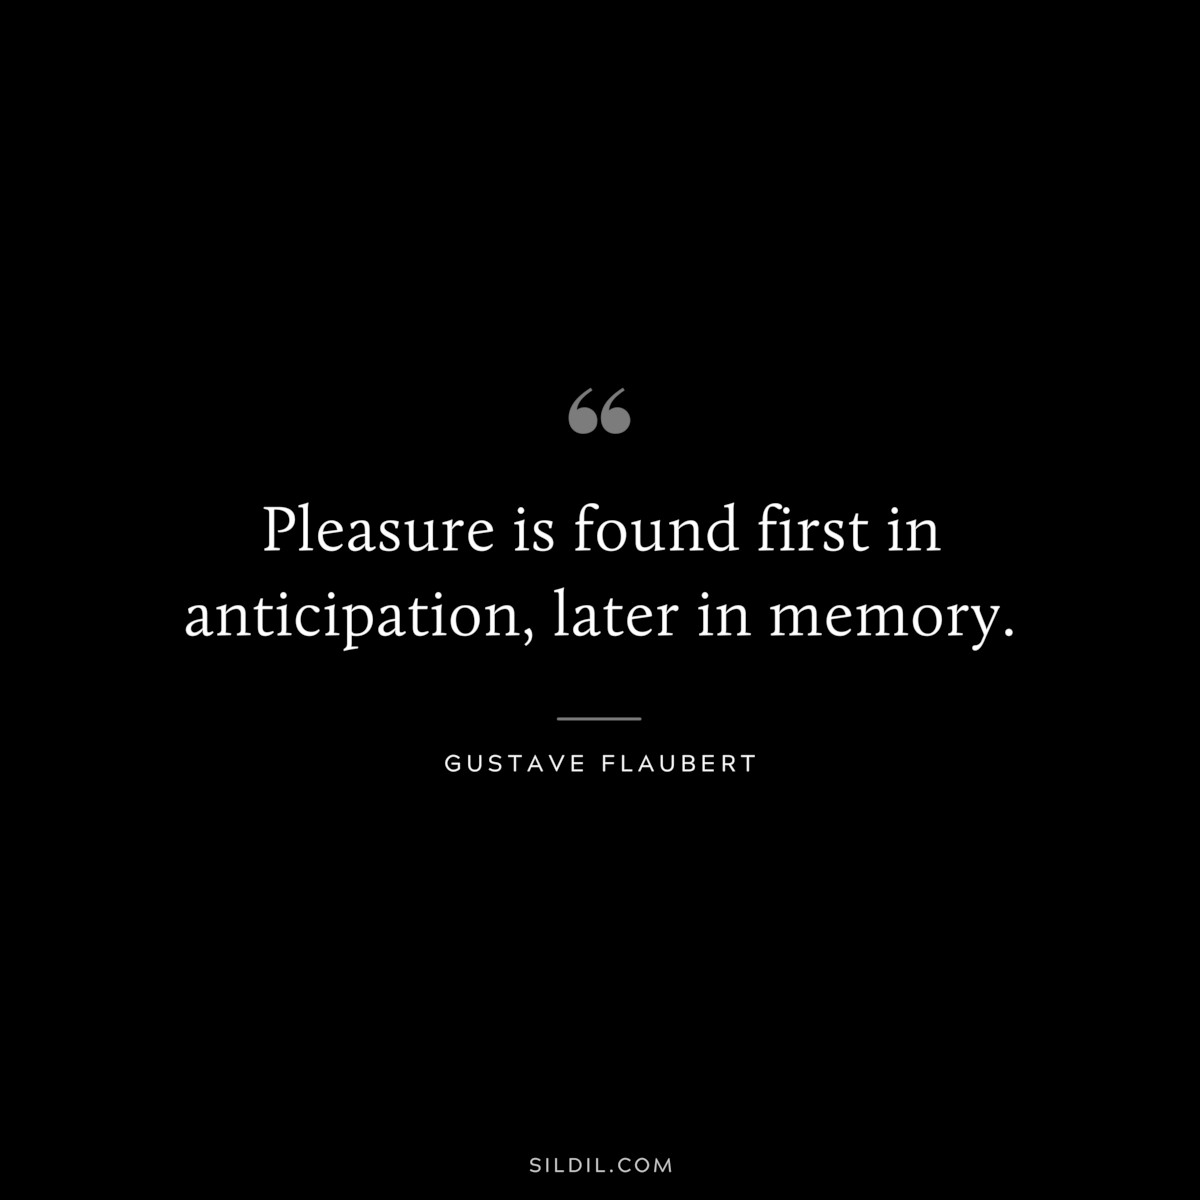 Pleasure is found first in anticipation, later in memory. ― Gustave Flaubert